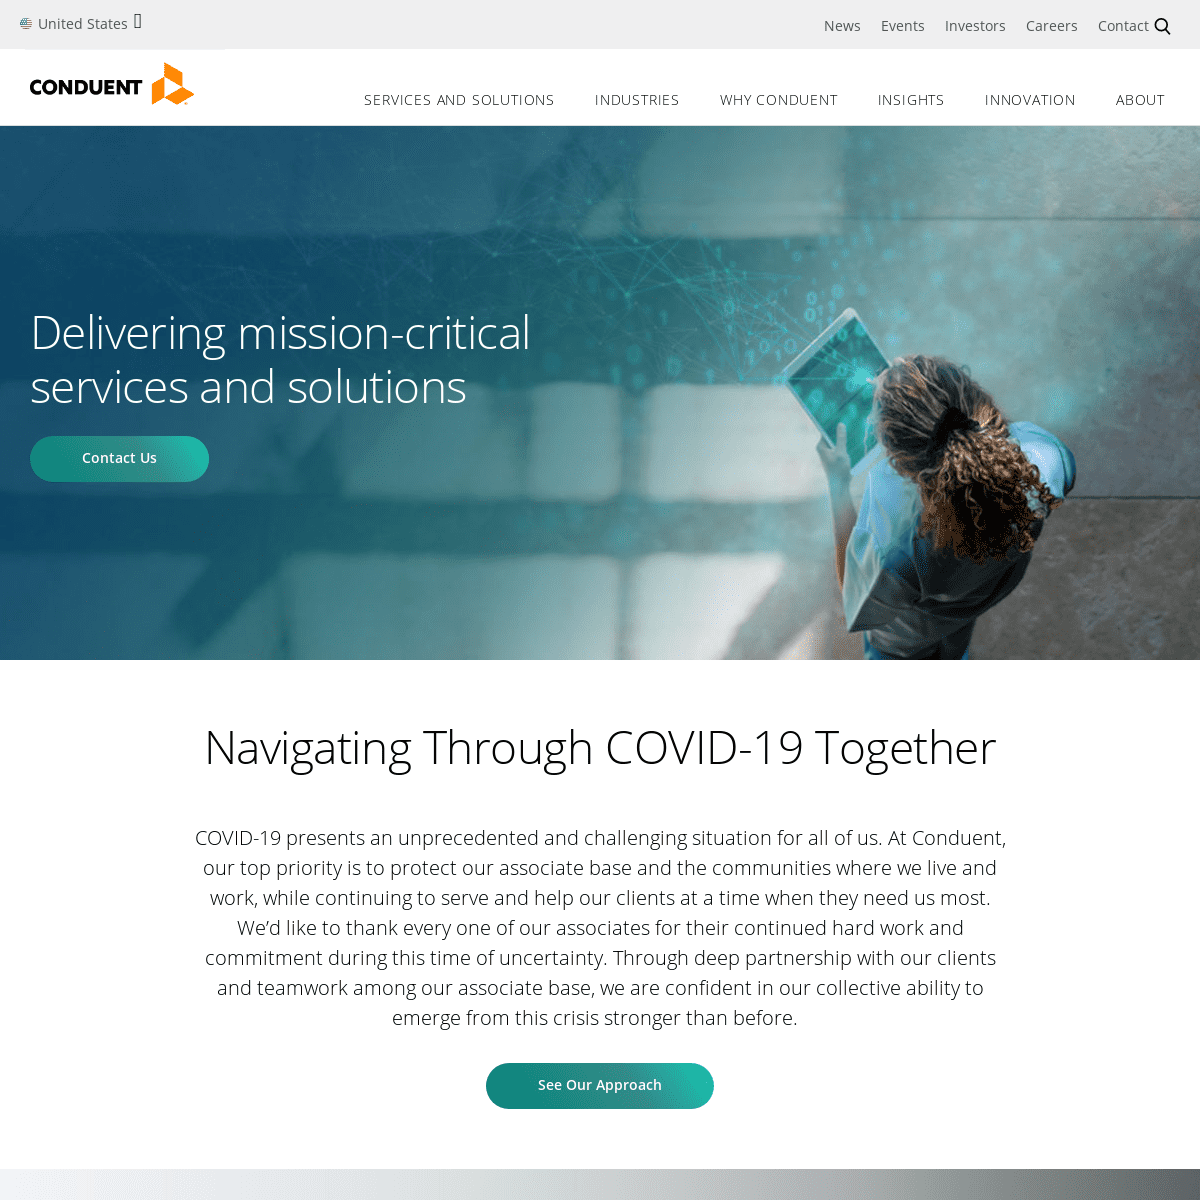 A complete backup of conduent.com